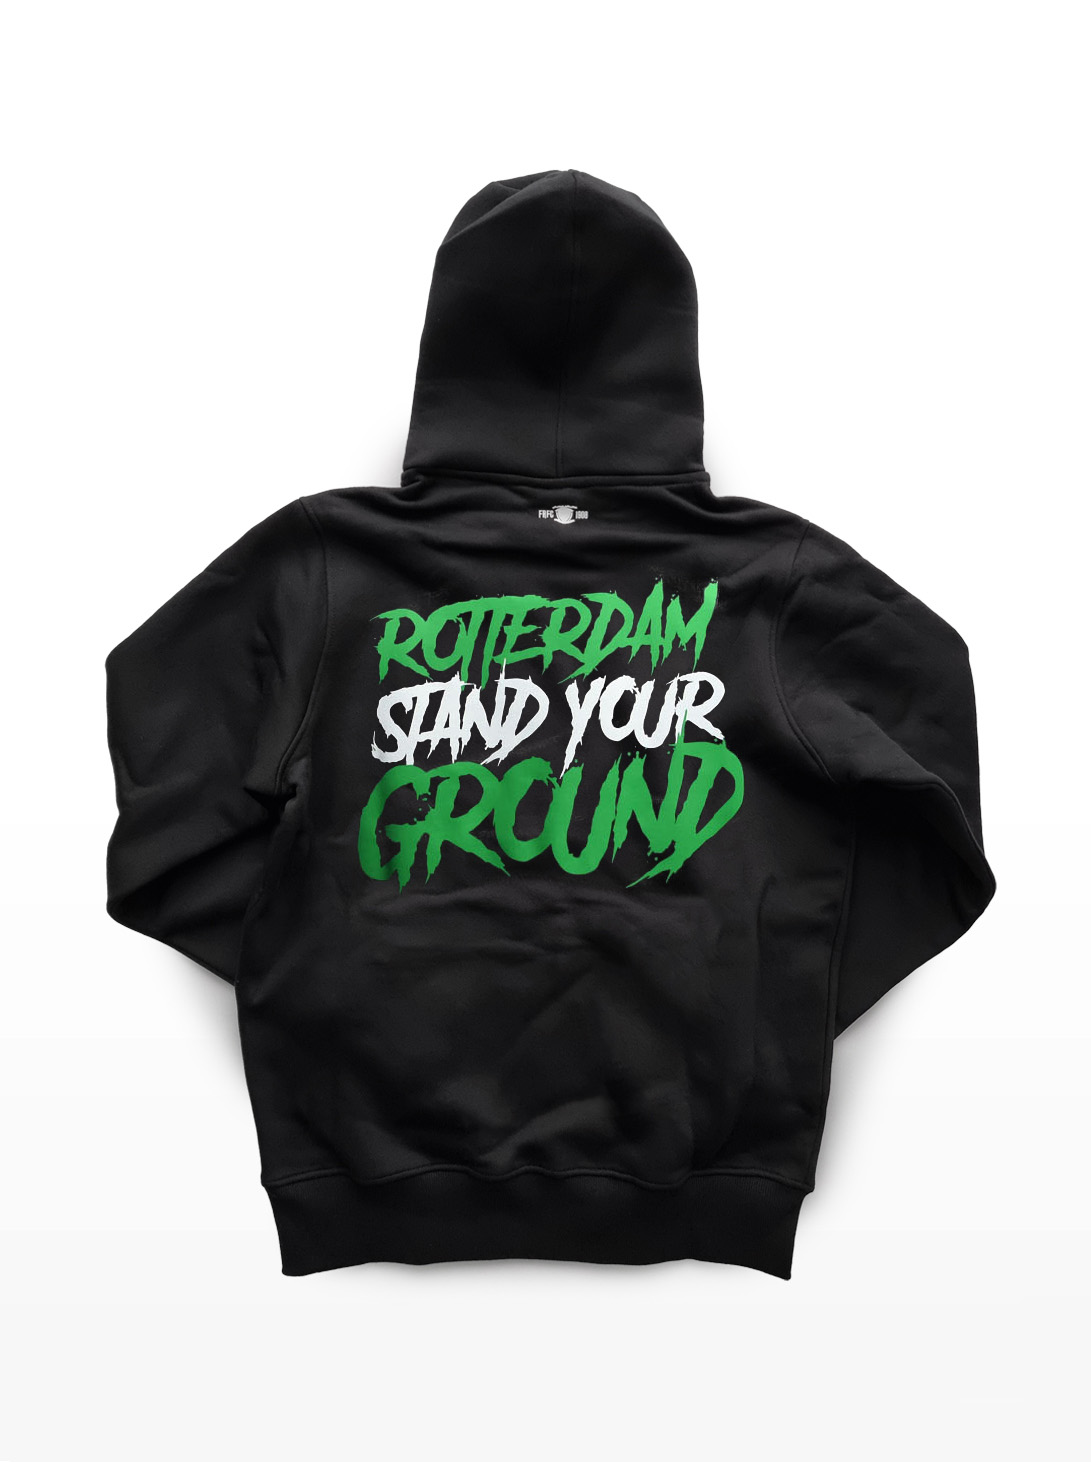 Rotterdam Stand Your Ground - Achterkant